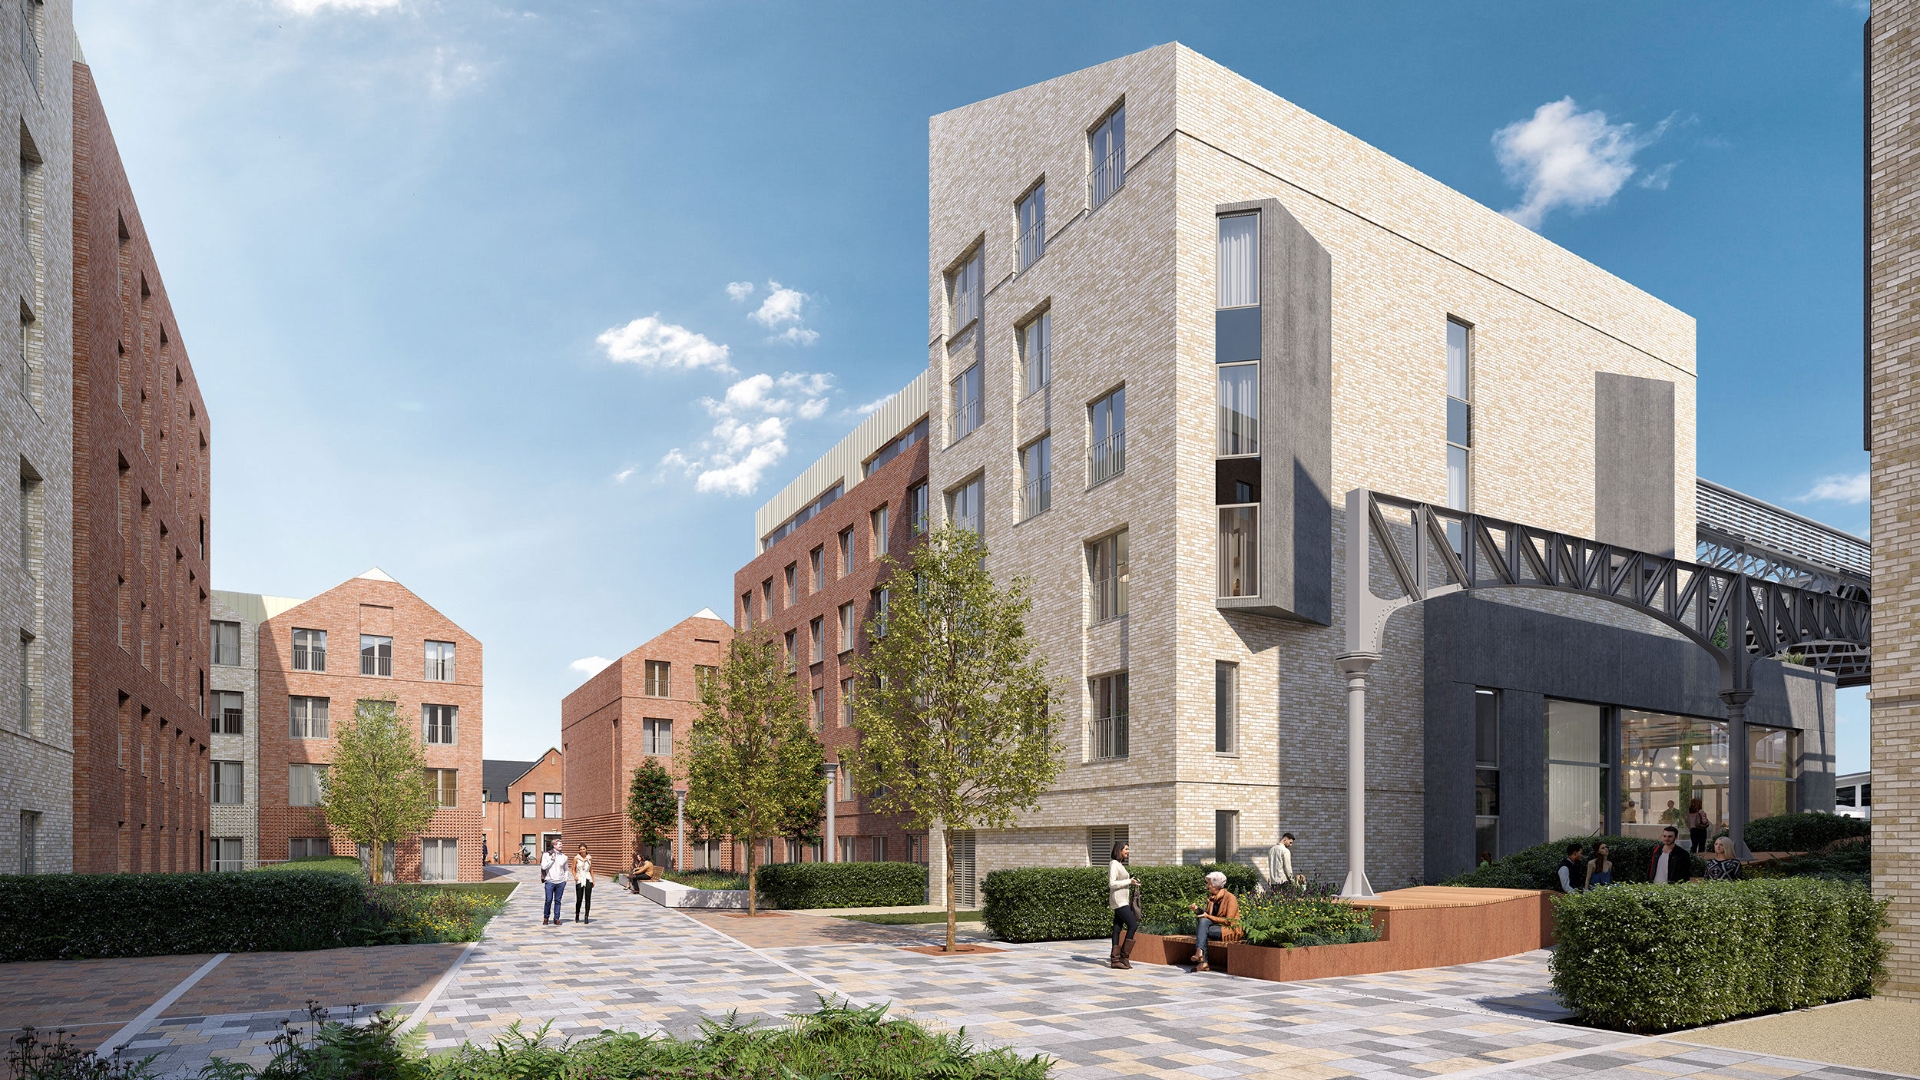 The complex will be 393 new build to rent flats with a mix of one, two and three-bed properties